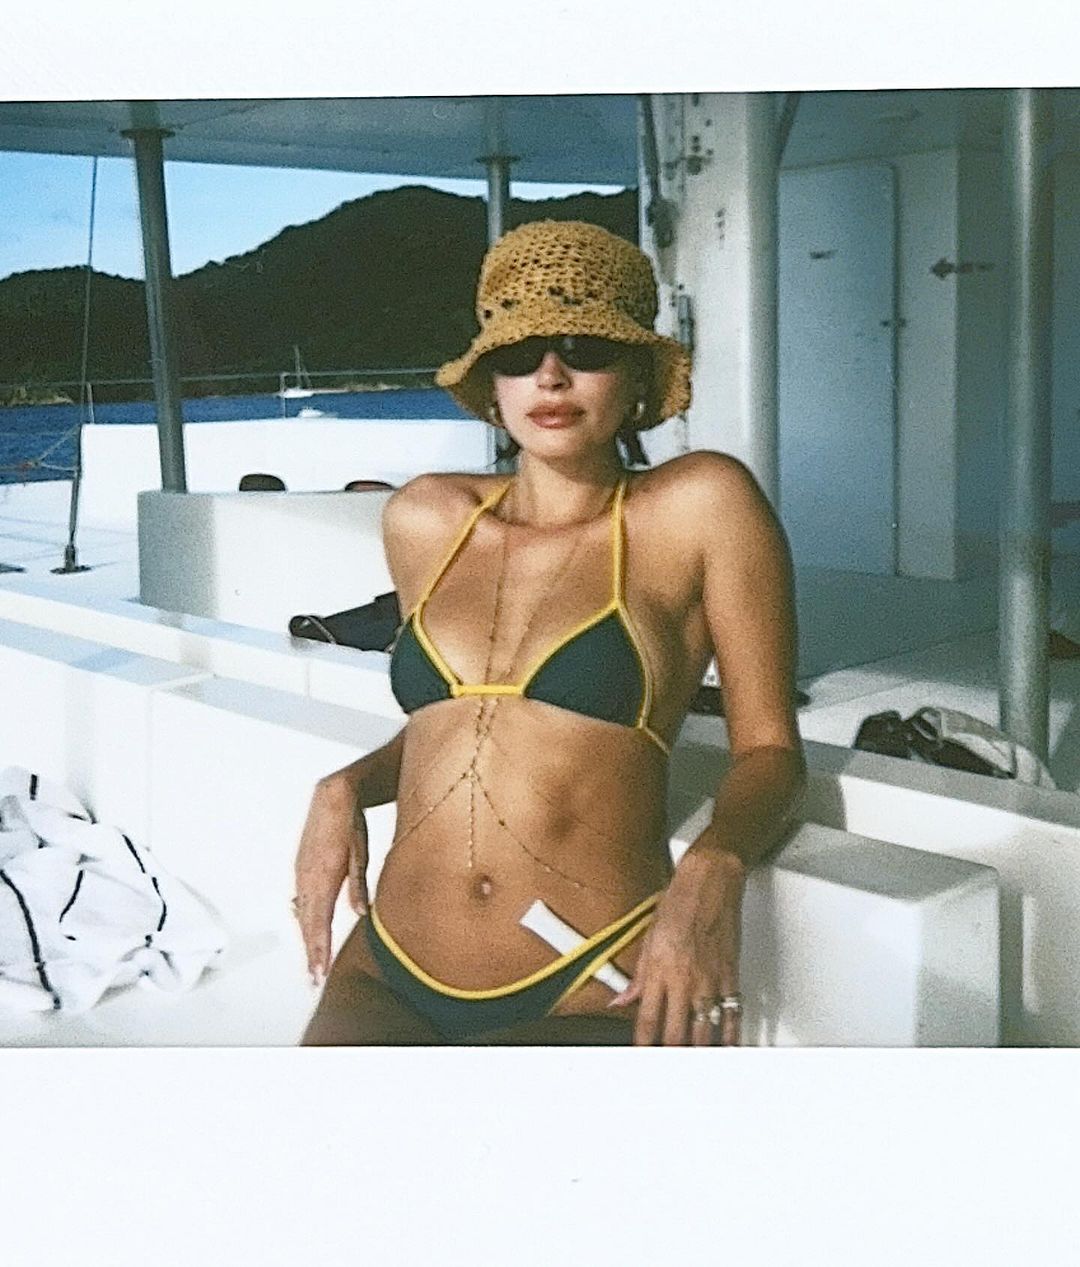 Hailey Bieber’s Booty on a Boat! - Photo 4